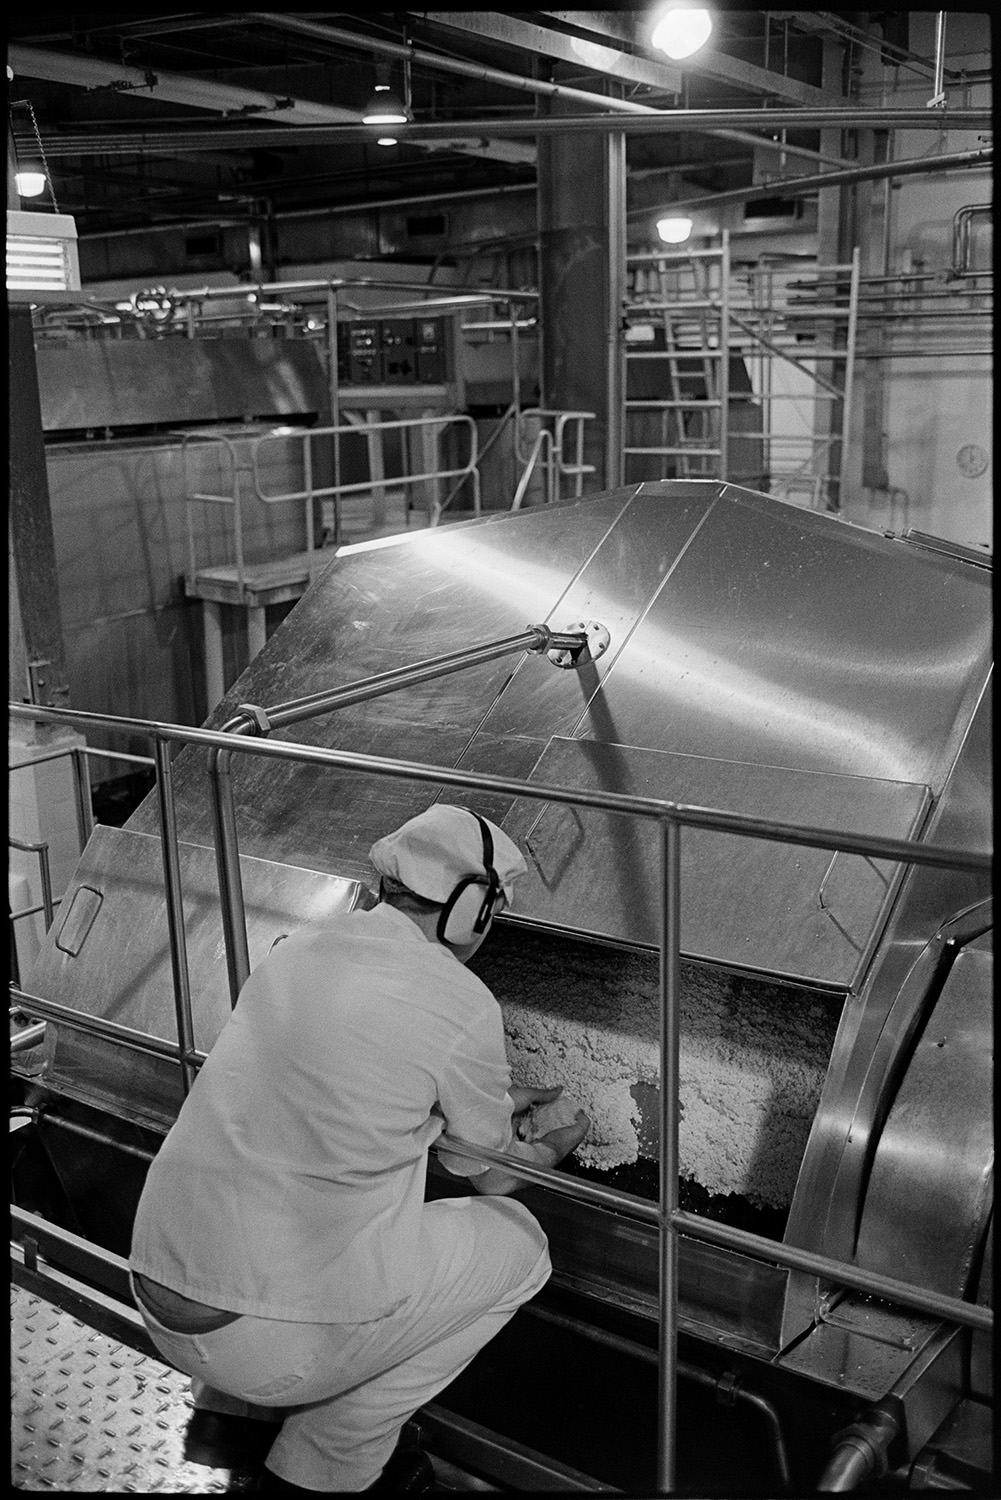 Men working in cheese factory. 
[A man inspecting cheese in a large metal container at the Dairy Crest North Tawton Cheese Factory. He is wearing ear defenders.]